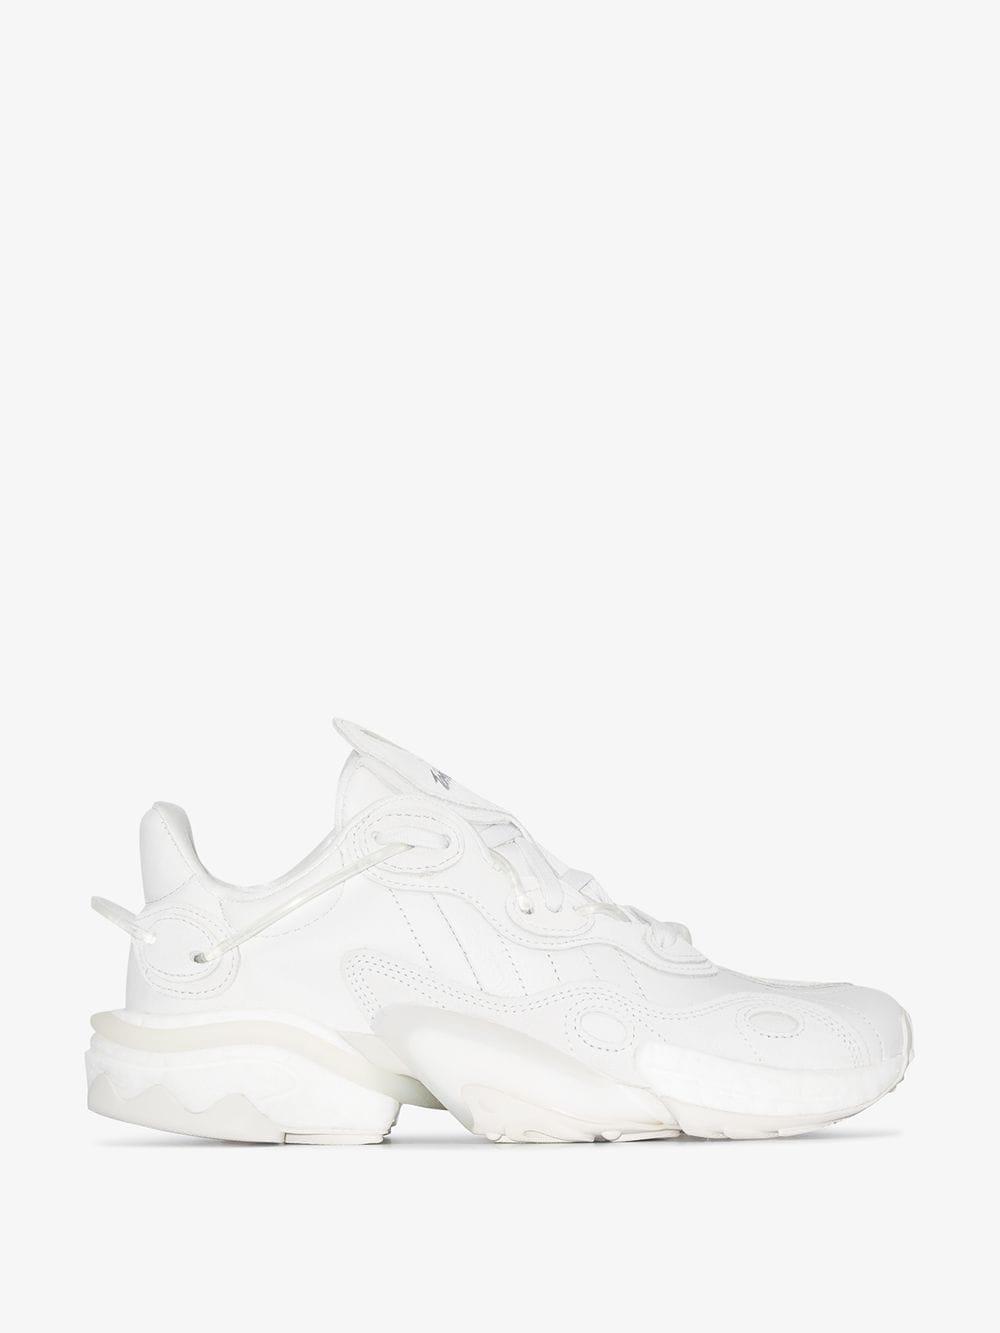 Torsion X Chunky Sneakers in White 